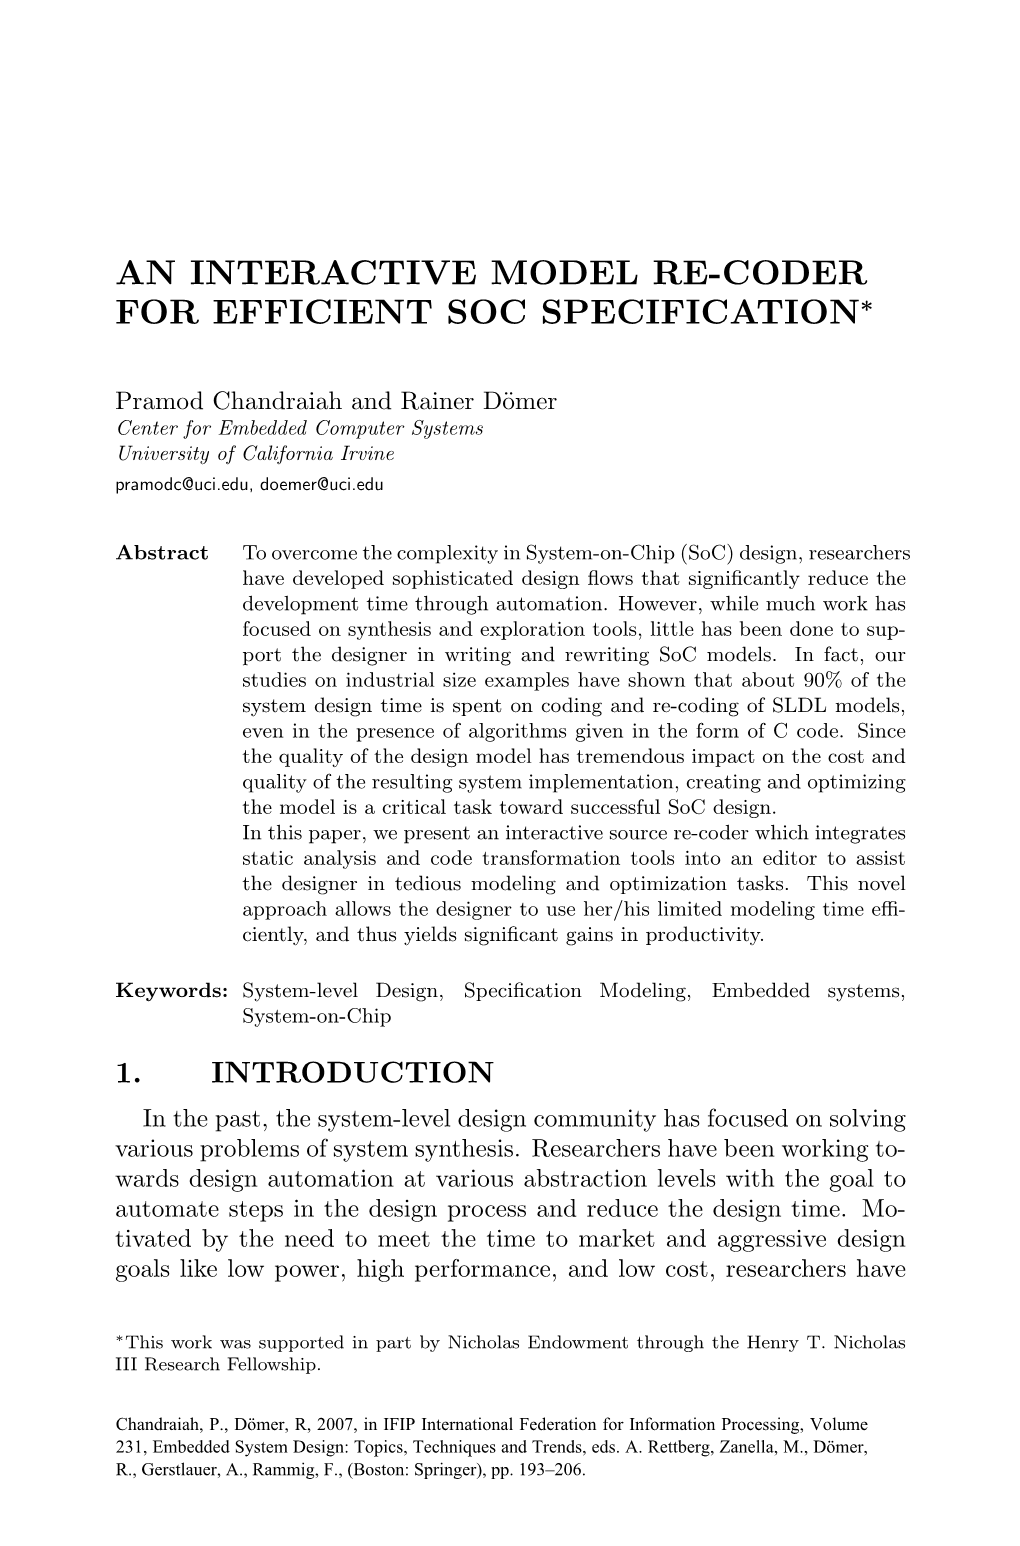 An Interactive Model Re-Coder for Efficient Soc Specification∗